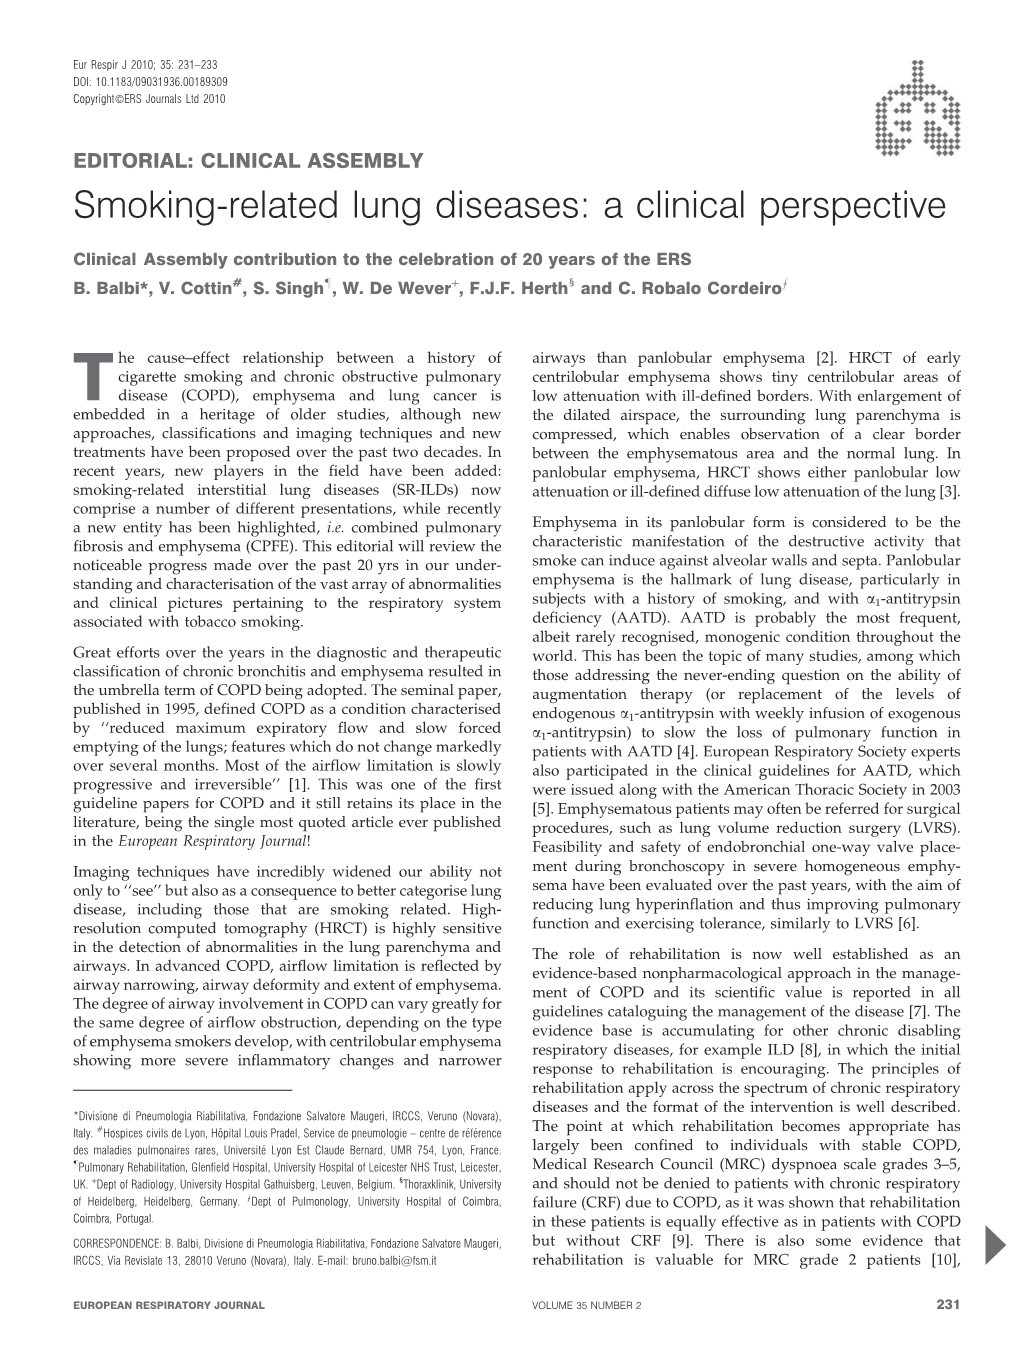 Smoking-Related Lung Diseases: a Clinical Perspective